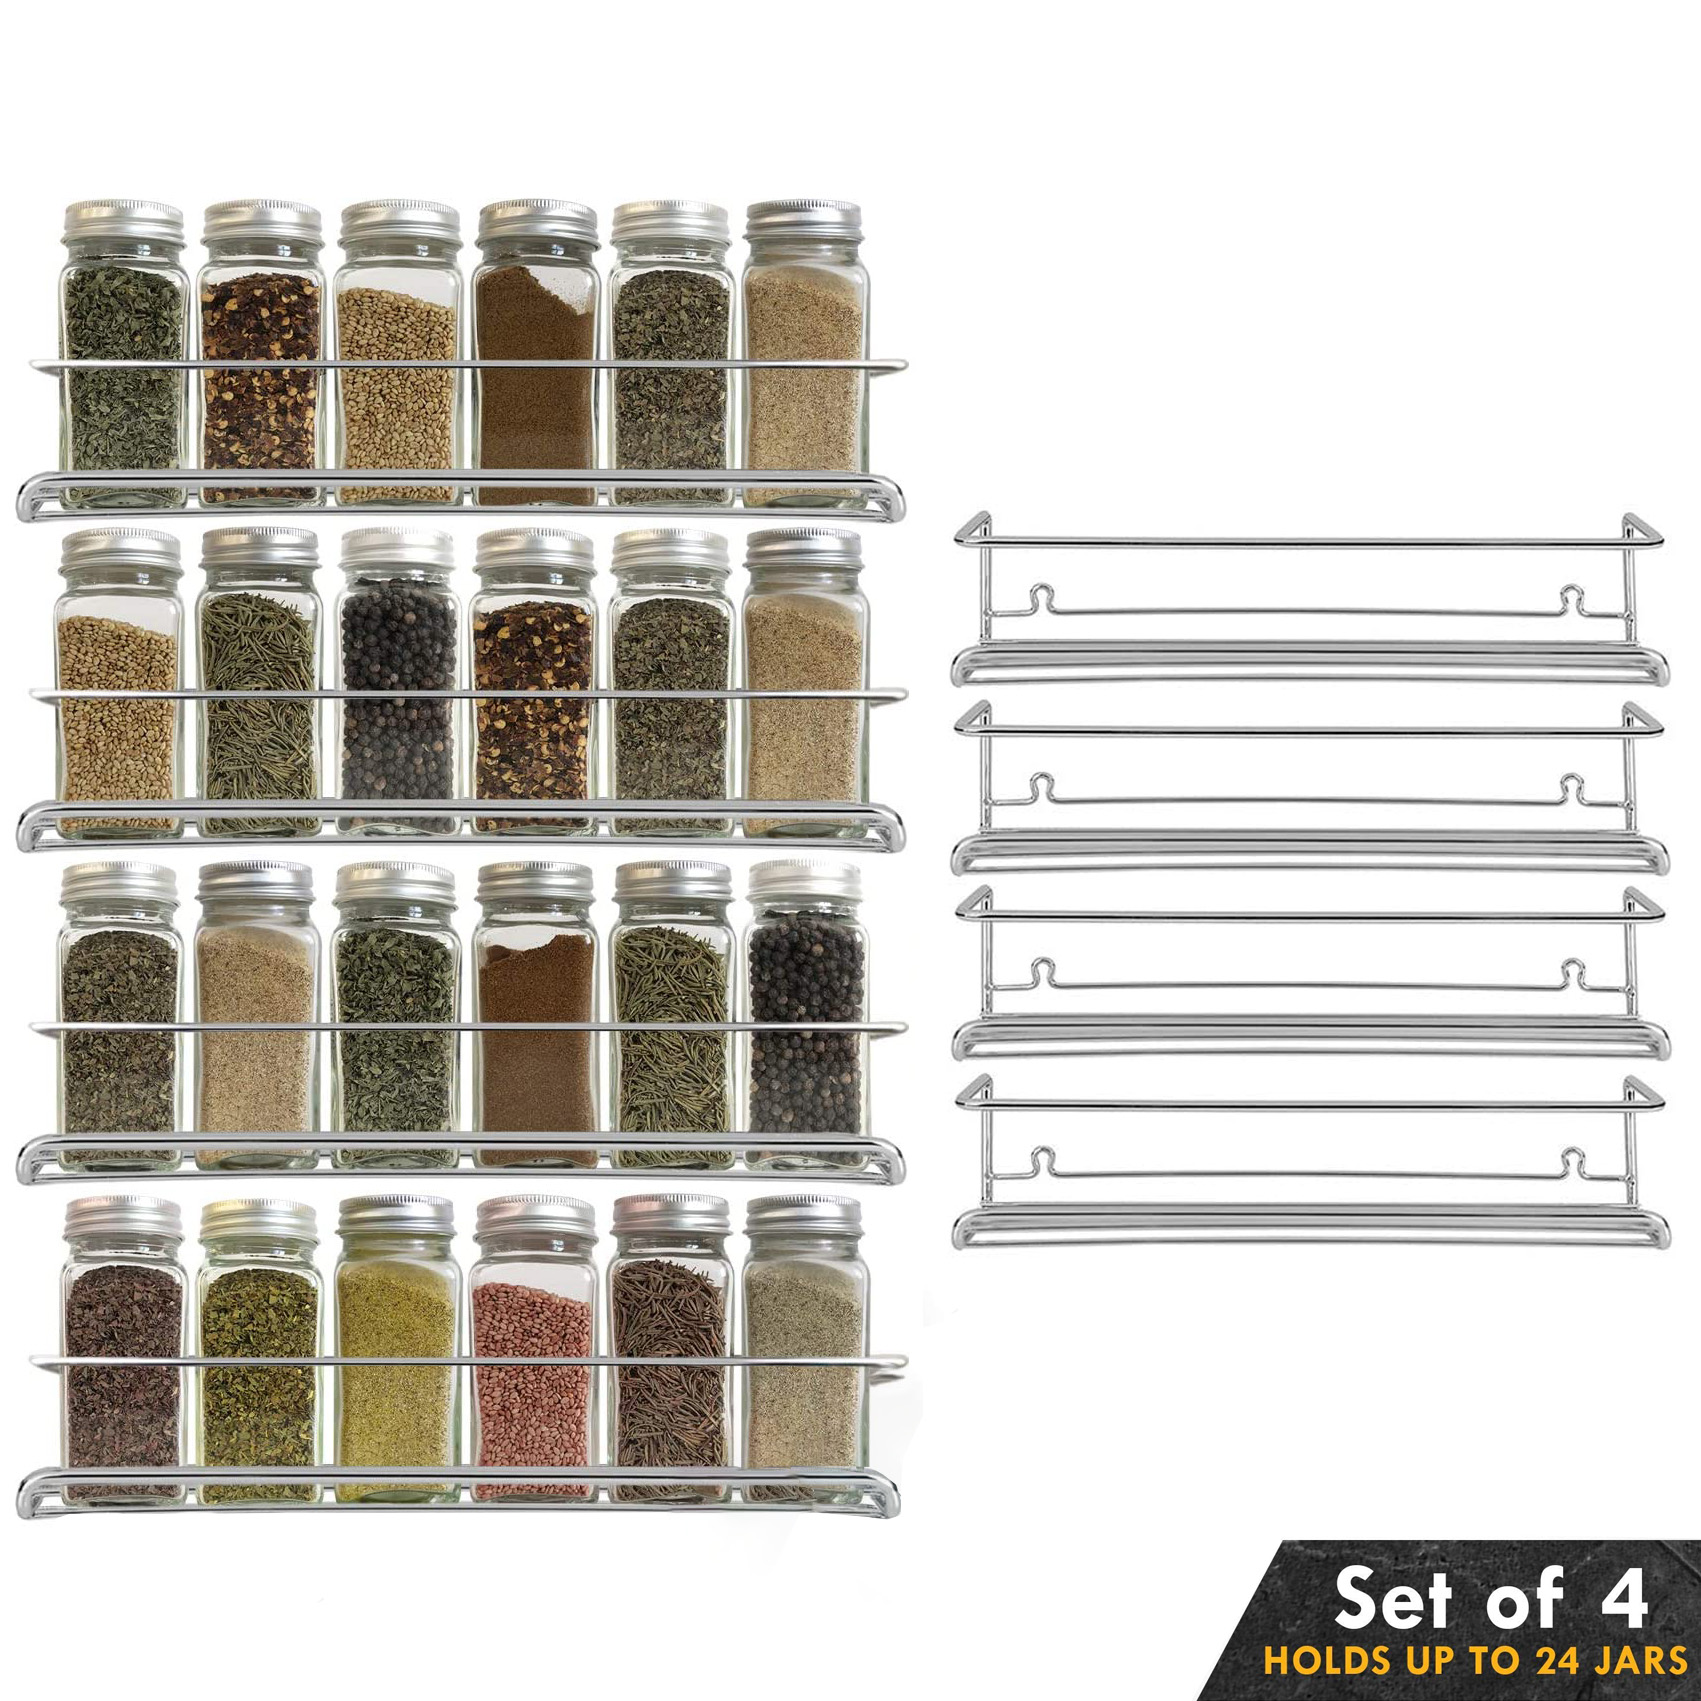 Set of 4 Tiered Door Mount, Wall Mounted, Under Sink Shelves Spice Rack Organizer For Pantry Featured Image